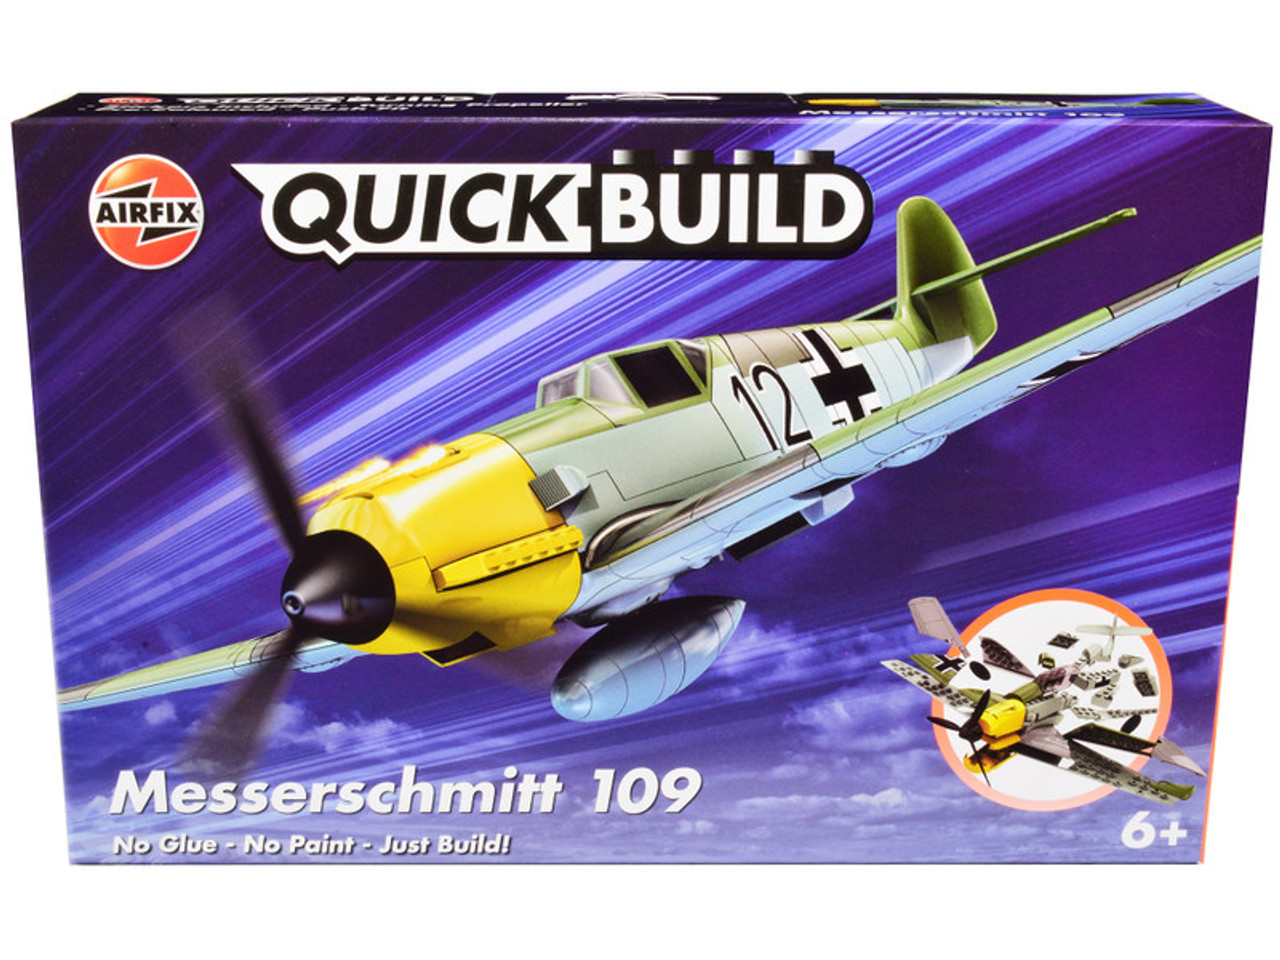 Skill 1 Model Kit Messerschmitt BF109 Snap Together Painted Plastic Model Airplane Kit by Airfix Quickbuild